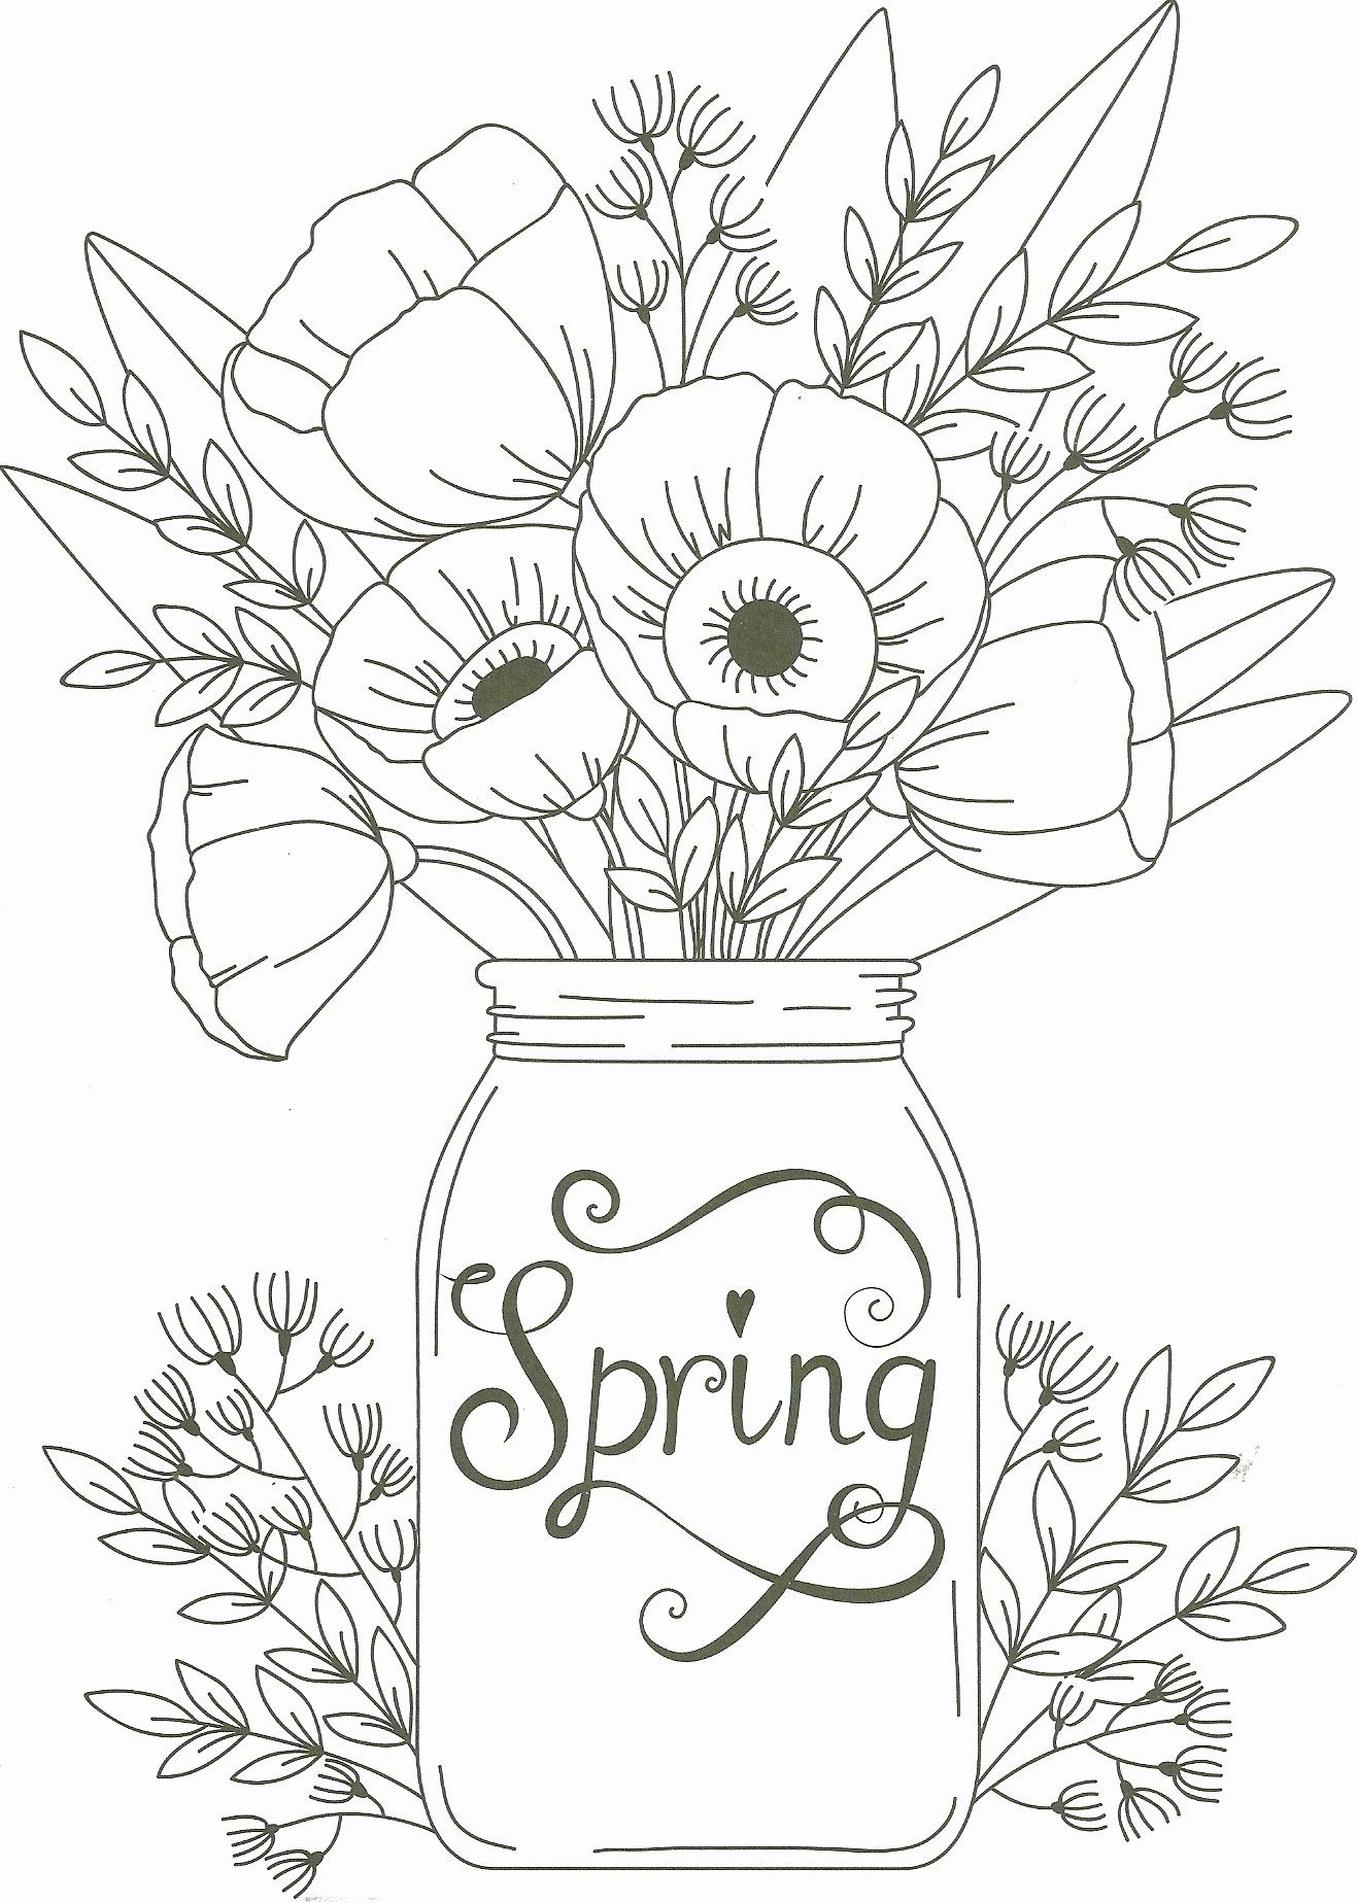 Free Printable Spring Coloring Pages For Adults   PRINTABLE TEMPLATES